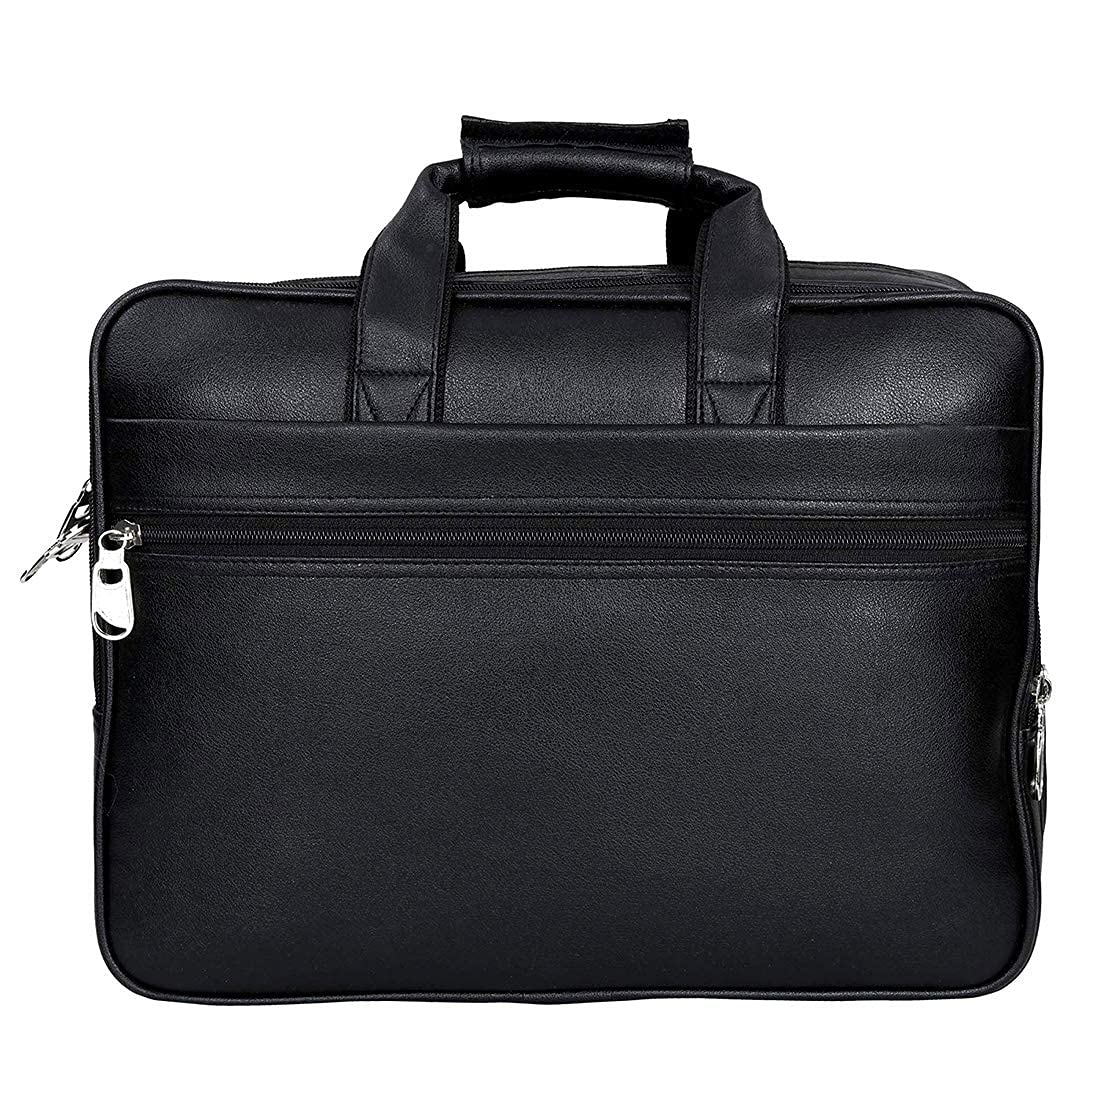 Leather World Expandable Pu Leather 15.6 Inch Water Resistant Laptop Bags Office Bag Men Women Messenger Briefcase - Black